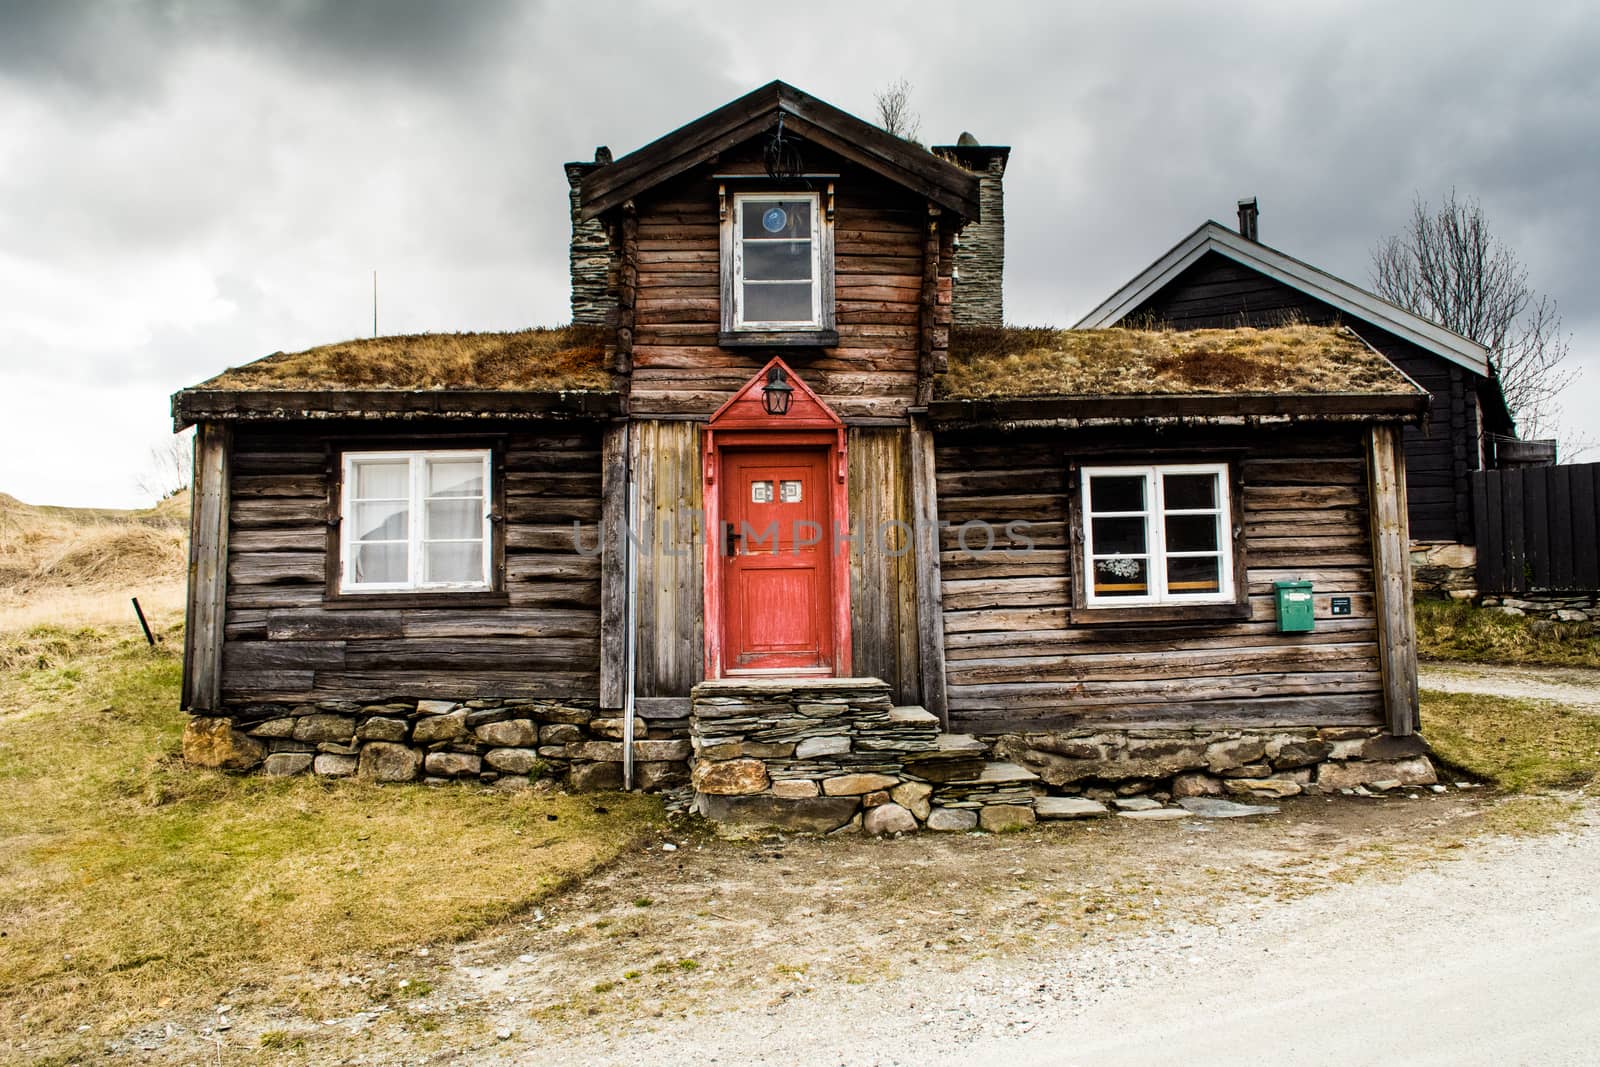 traditional wooden house in the historical mining village of Roros, Norway by kb79